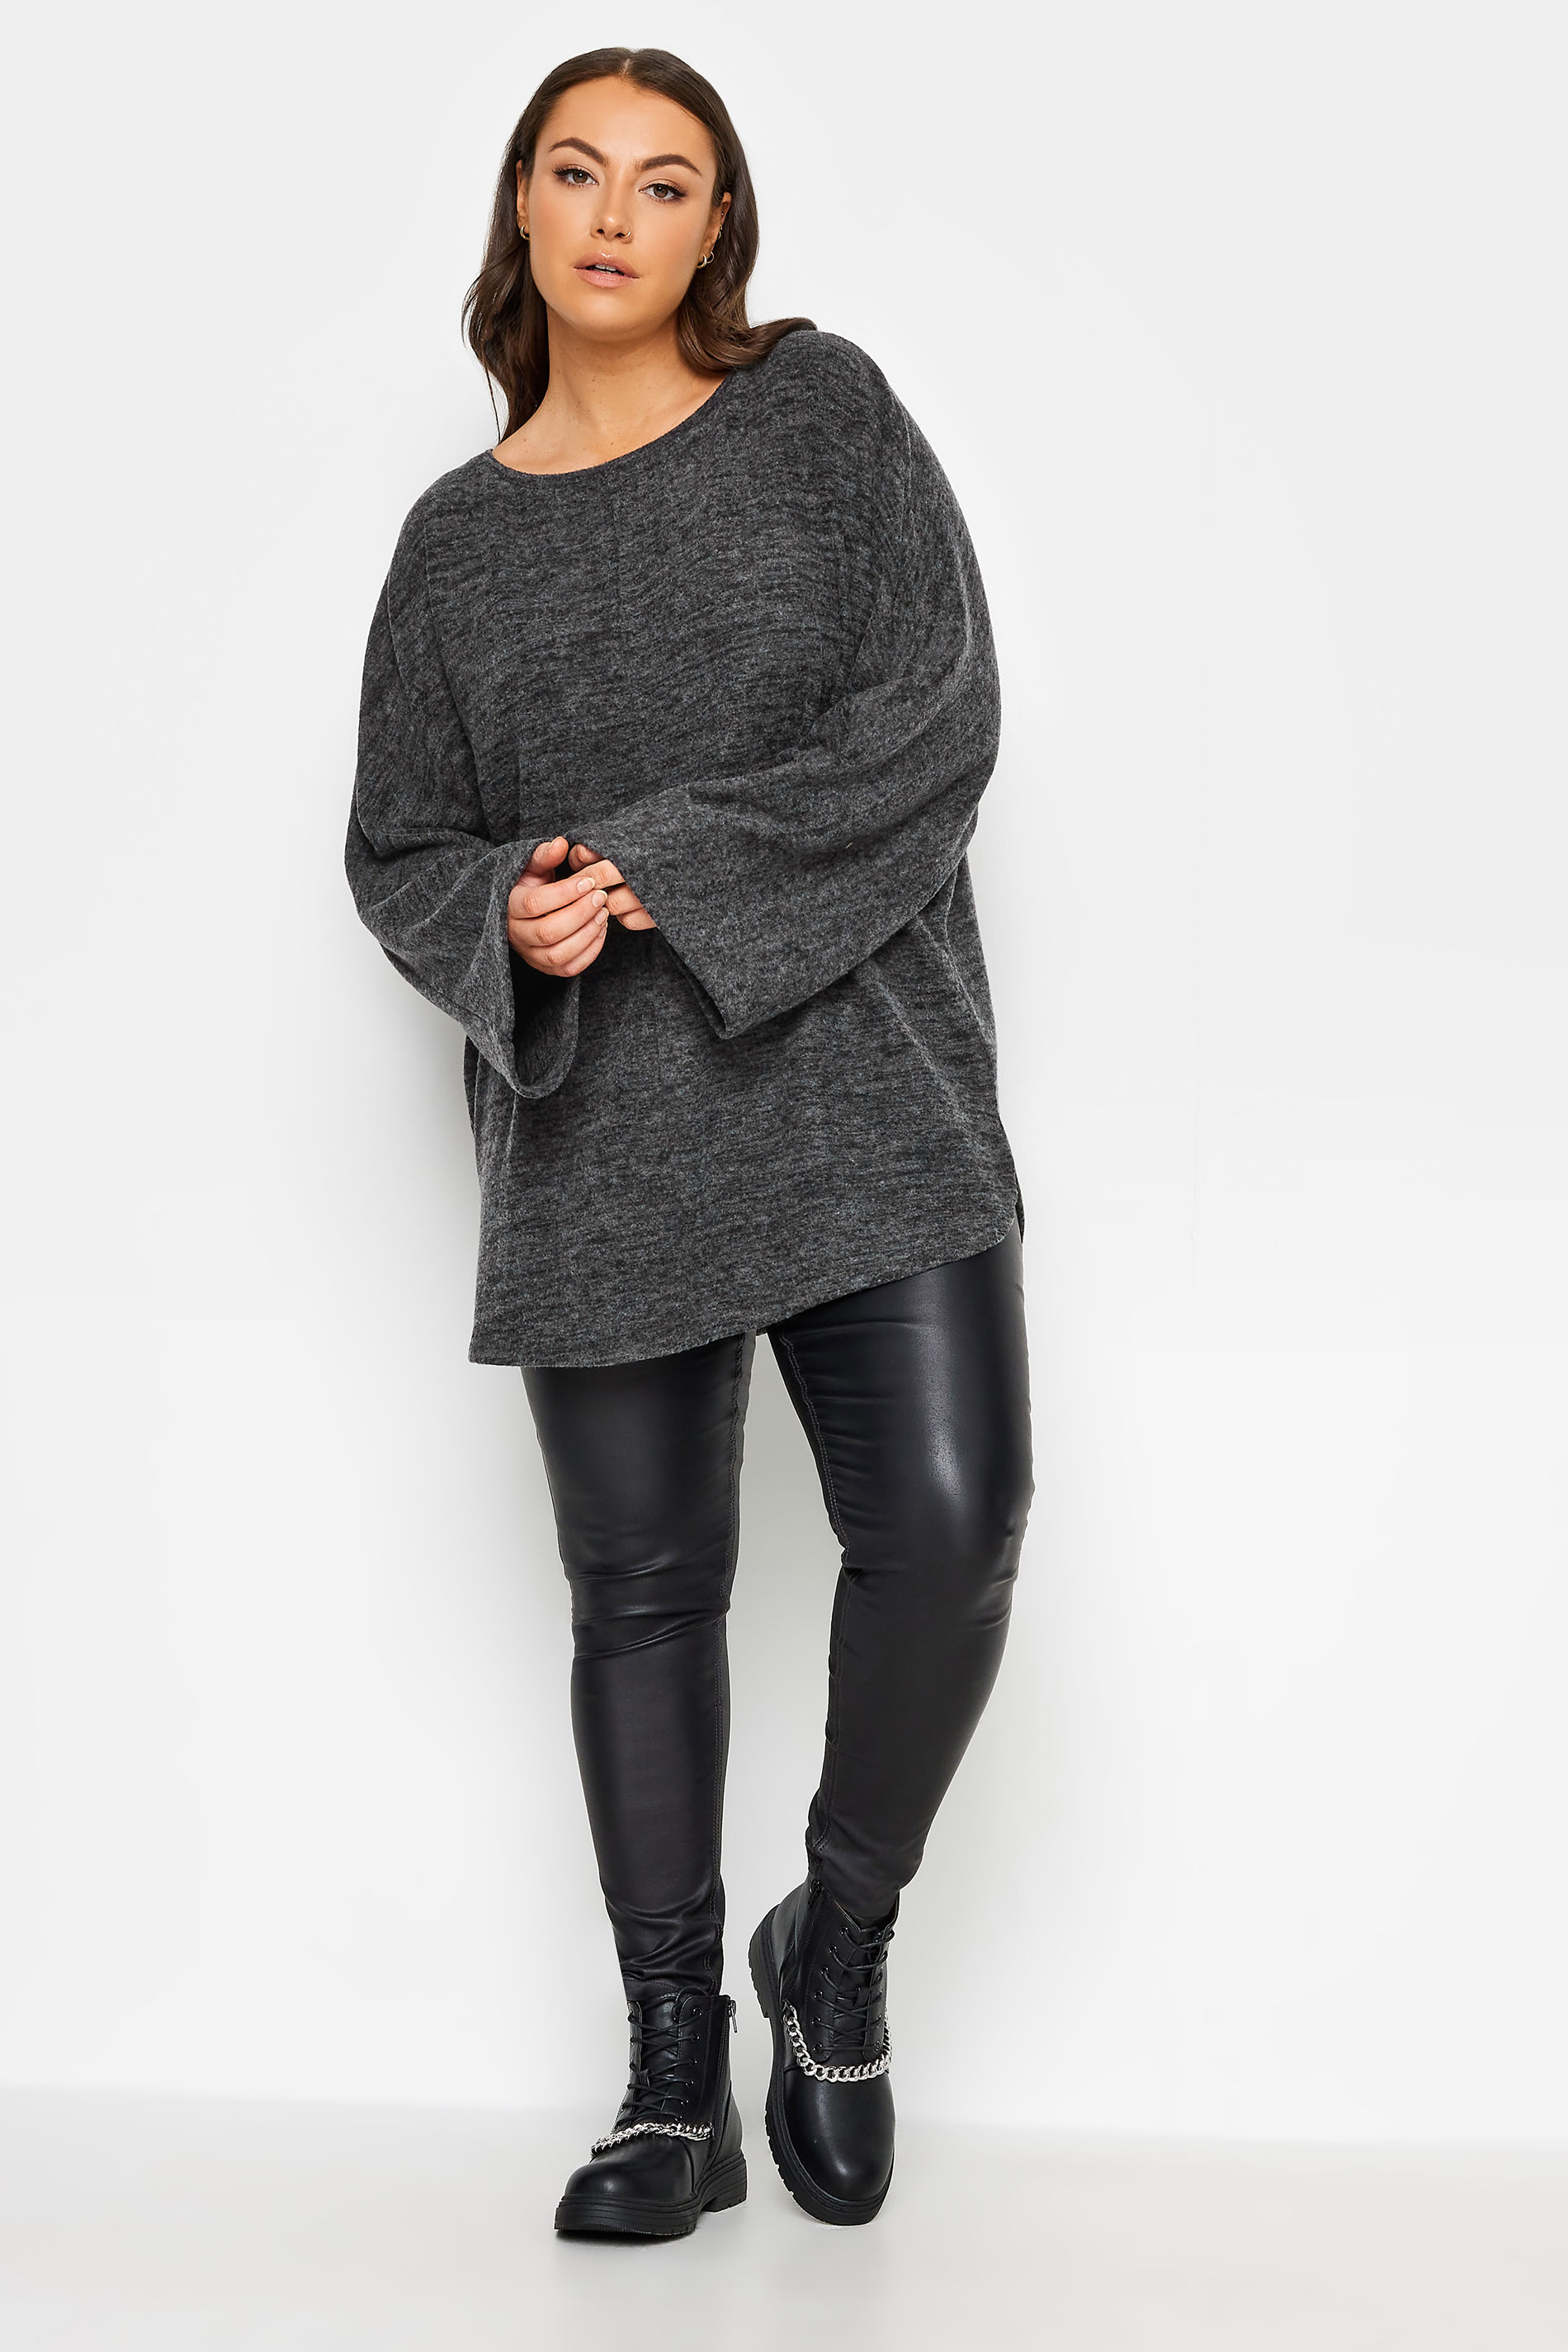 YOURS LUXURY Plus Size Charcoal Grey Batwing Sleeve Jumper | Yours Clothing 2